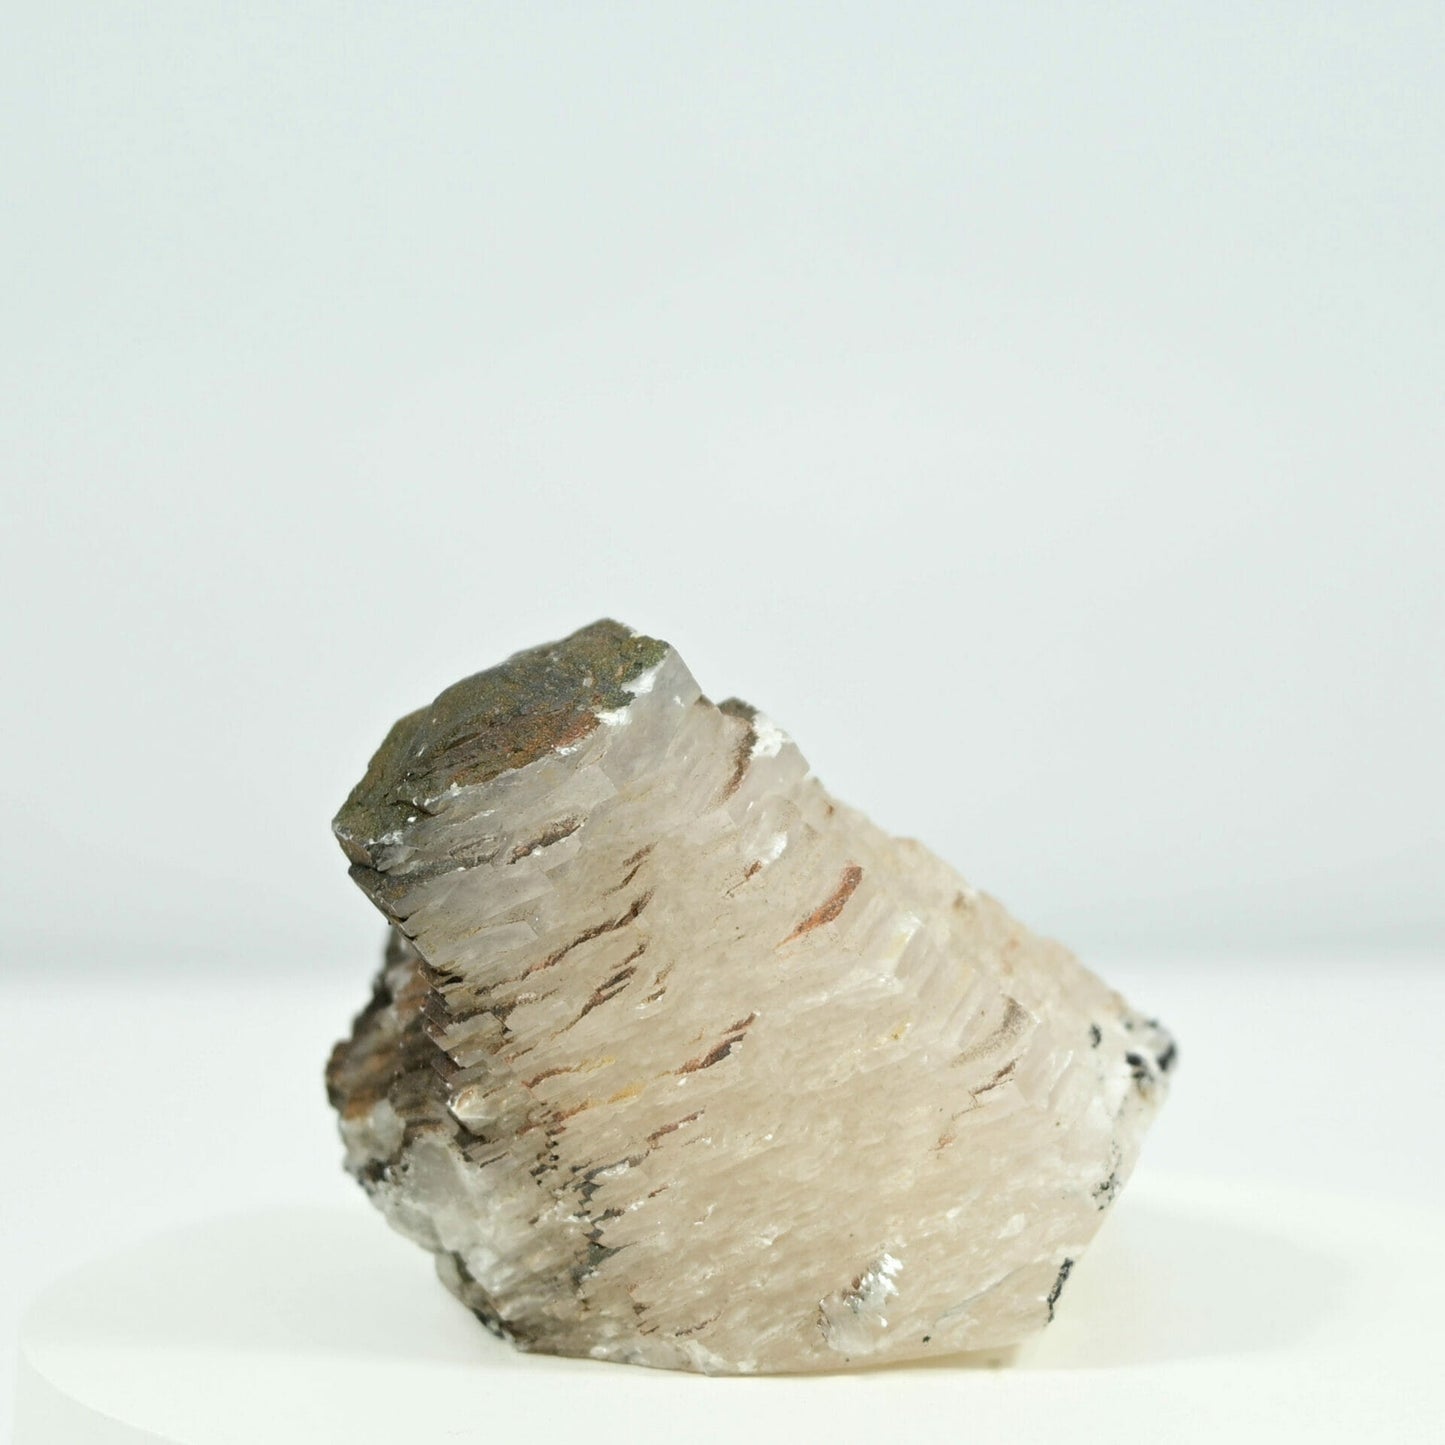 Rare Step calcite thousand Layers calcite covered with tiny Pyrites side